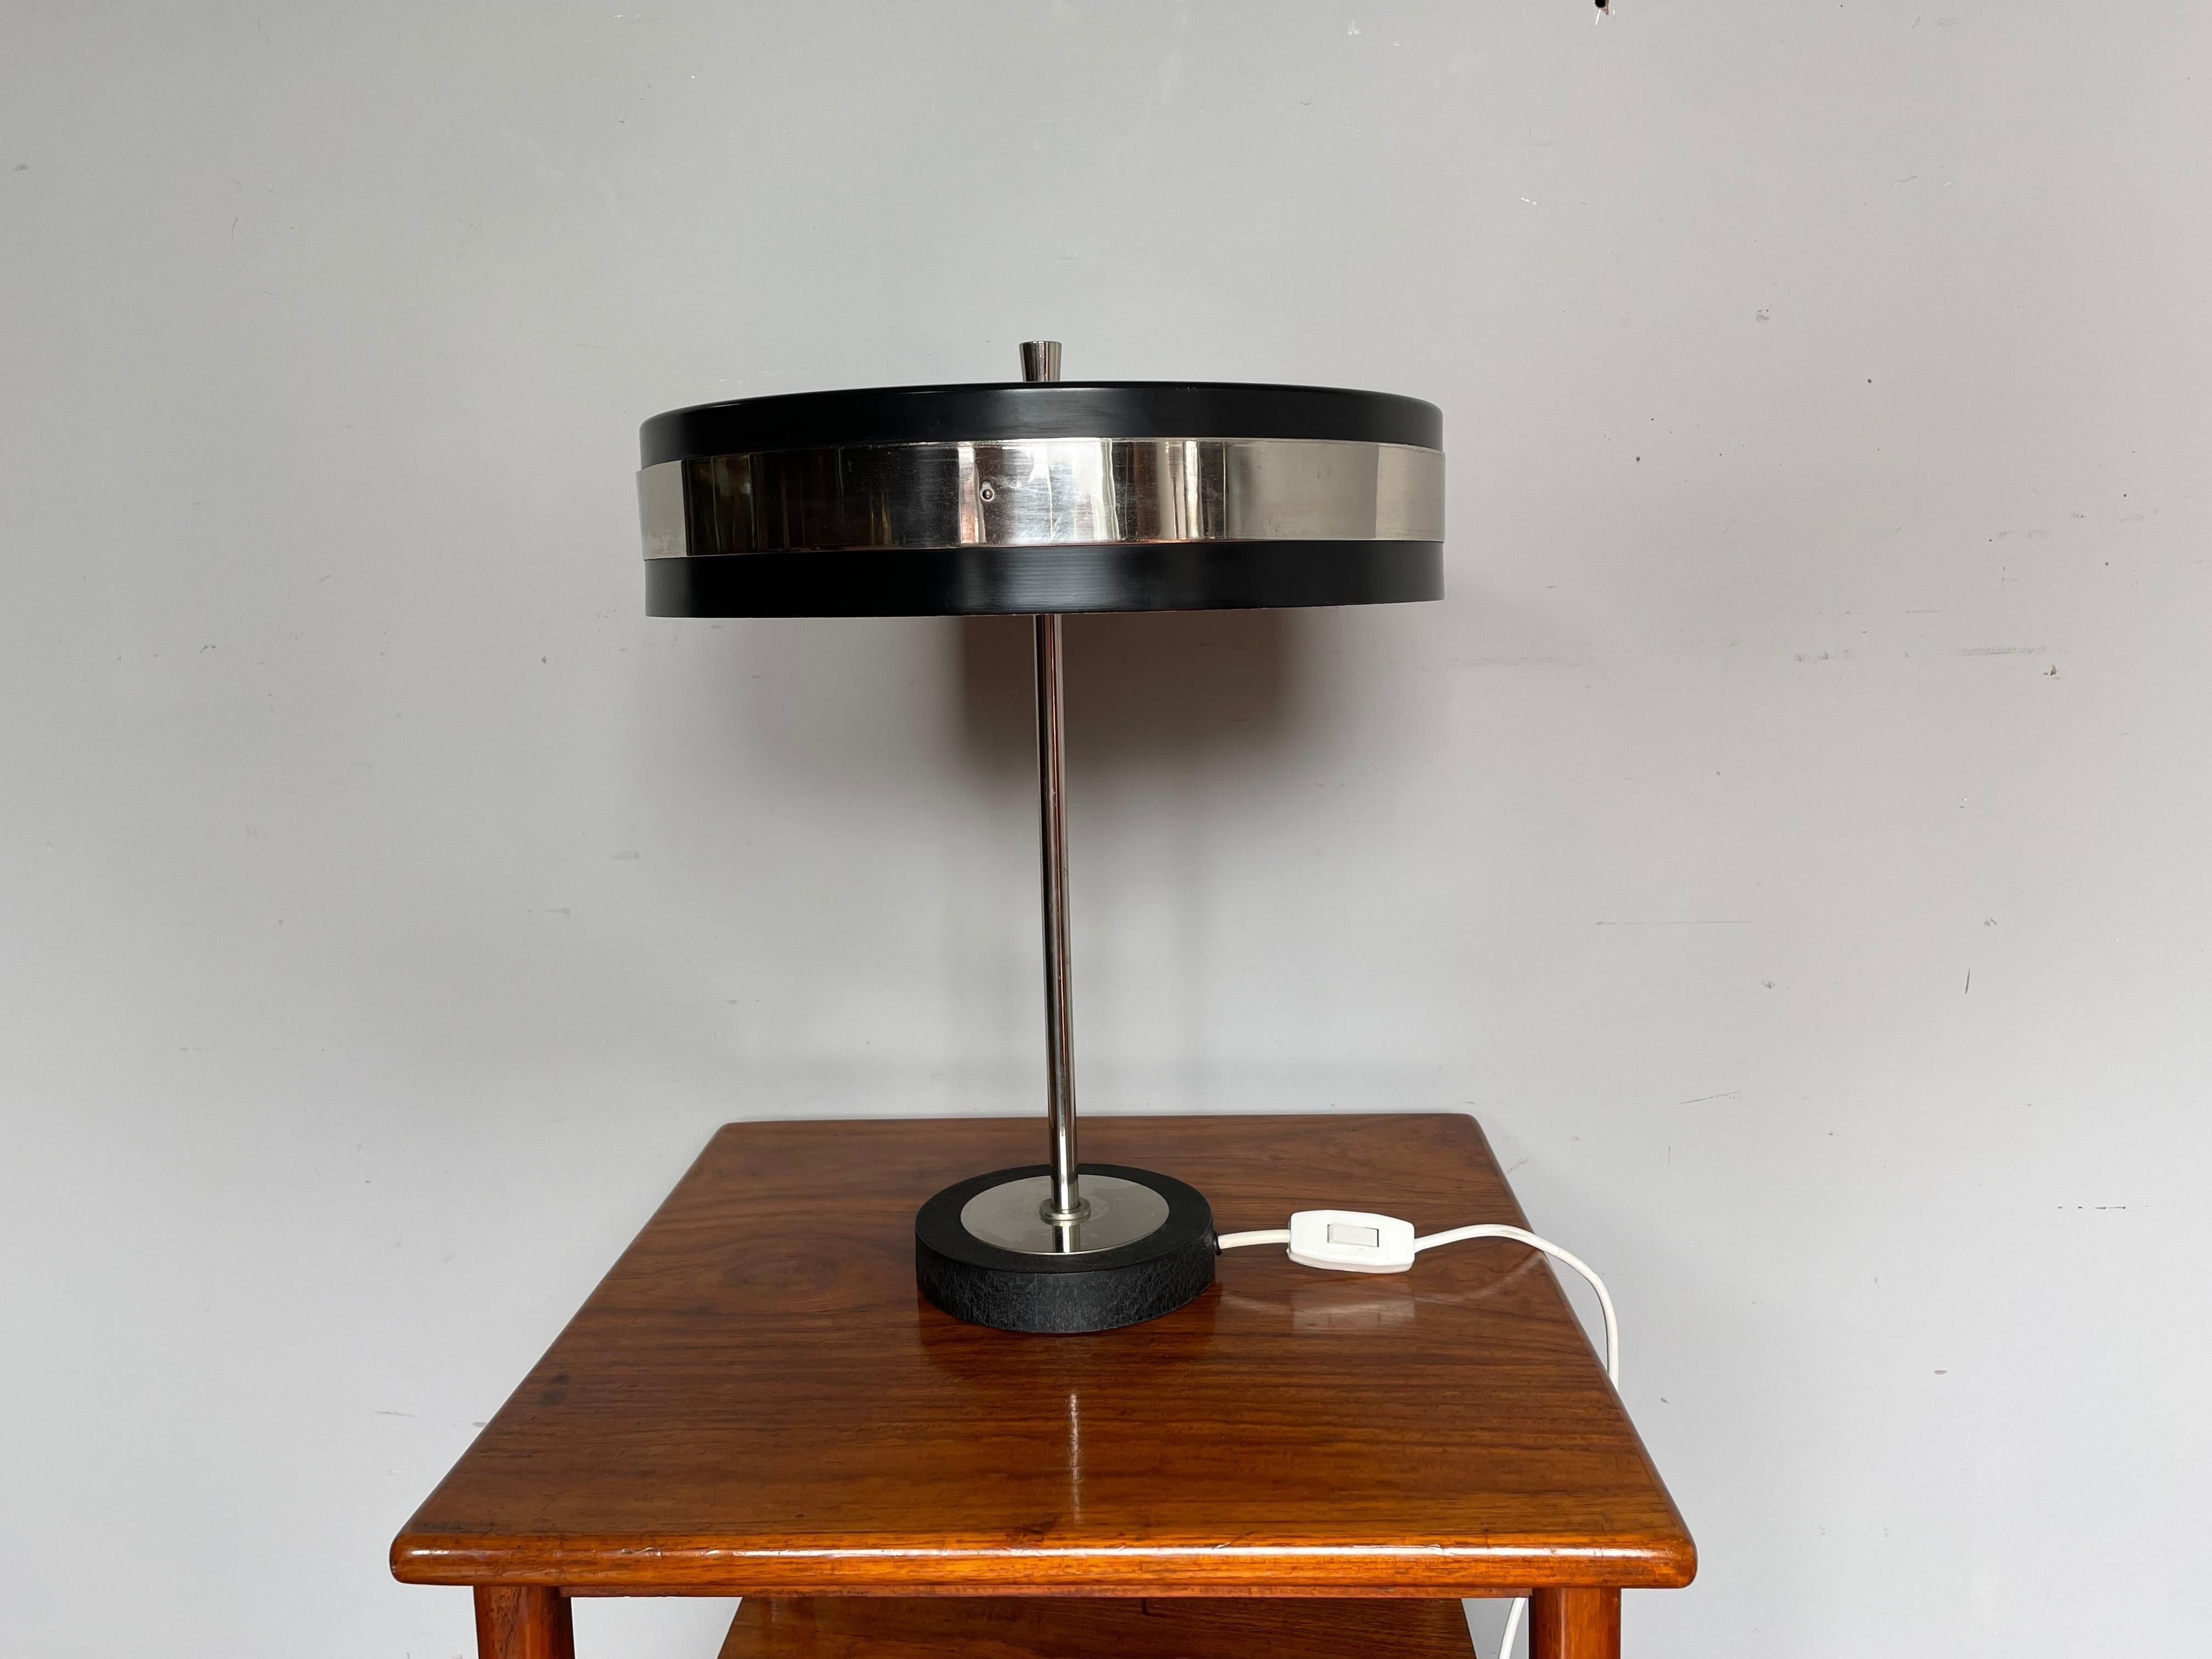 Stylish and rare midcentury modern desk lamp in the manner of Louis Kalff.

Both figuratively and literally, this 1950s or 60s fixture is perfect for bringing light to your Mid-Century Modern interior. This rare light has a Dutch design look and